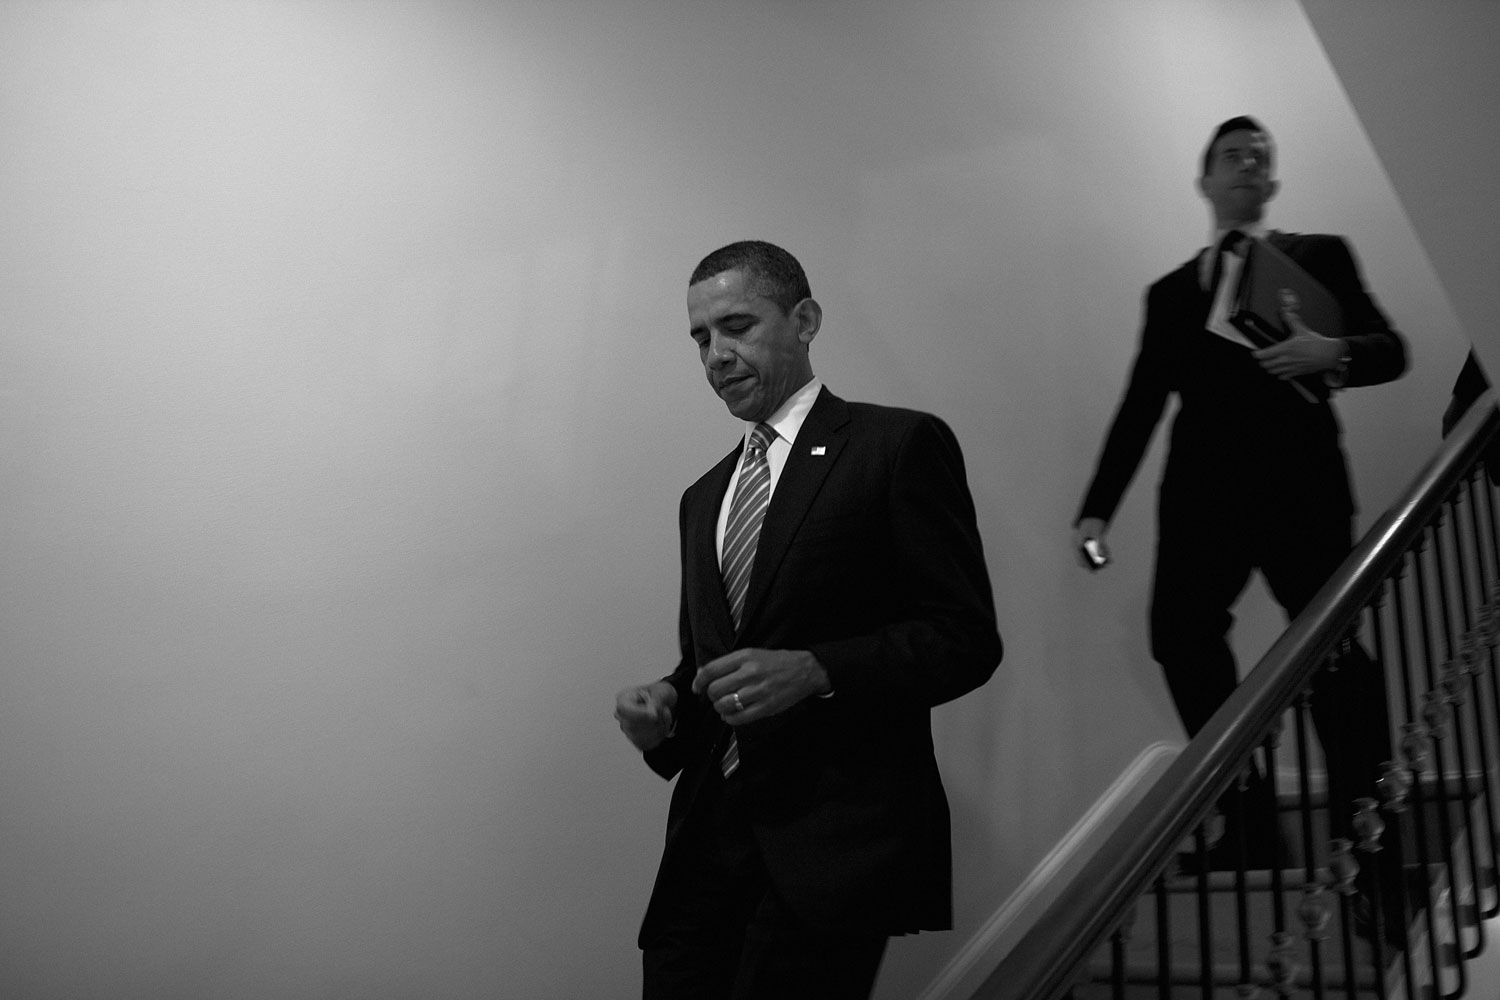 January 17, 2012. Obama walks down to the ground floor to return to the Oval Office, after the St. Louis Cardinals event.